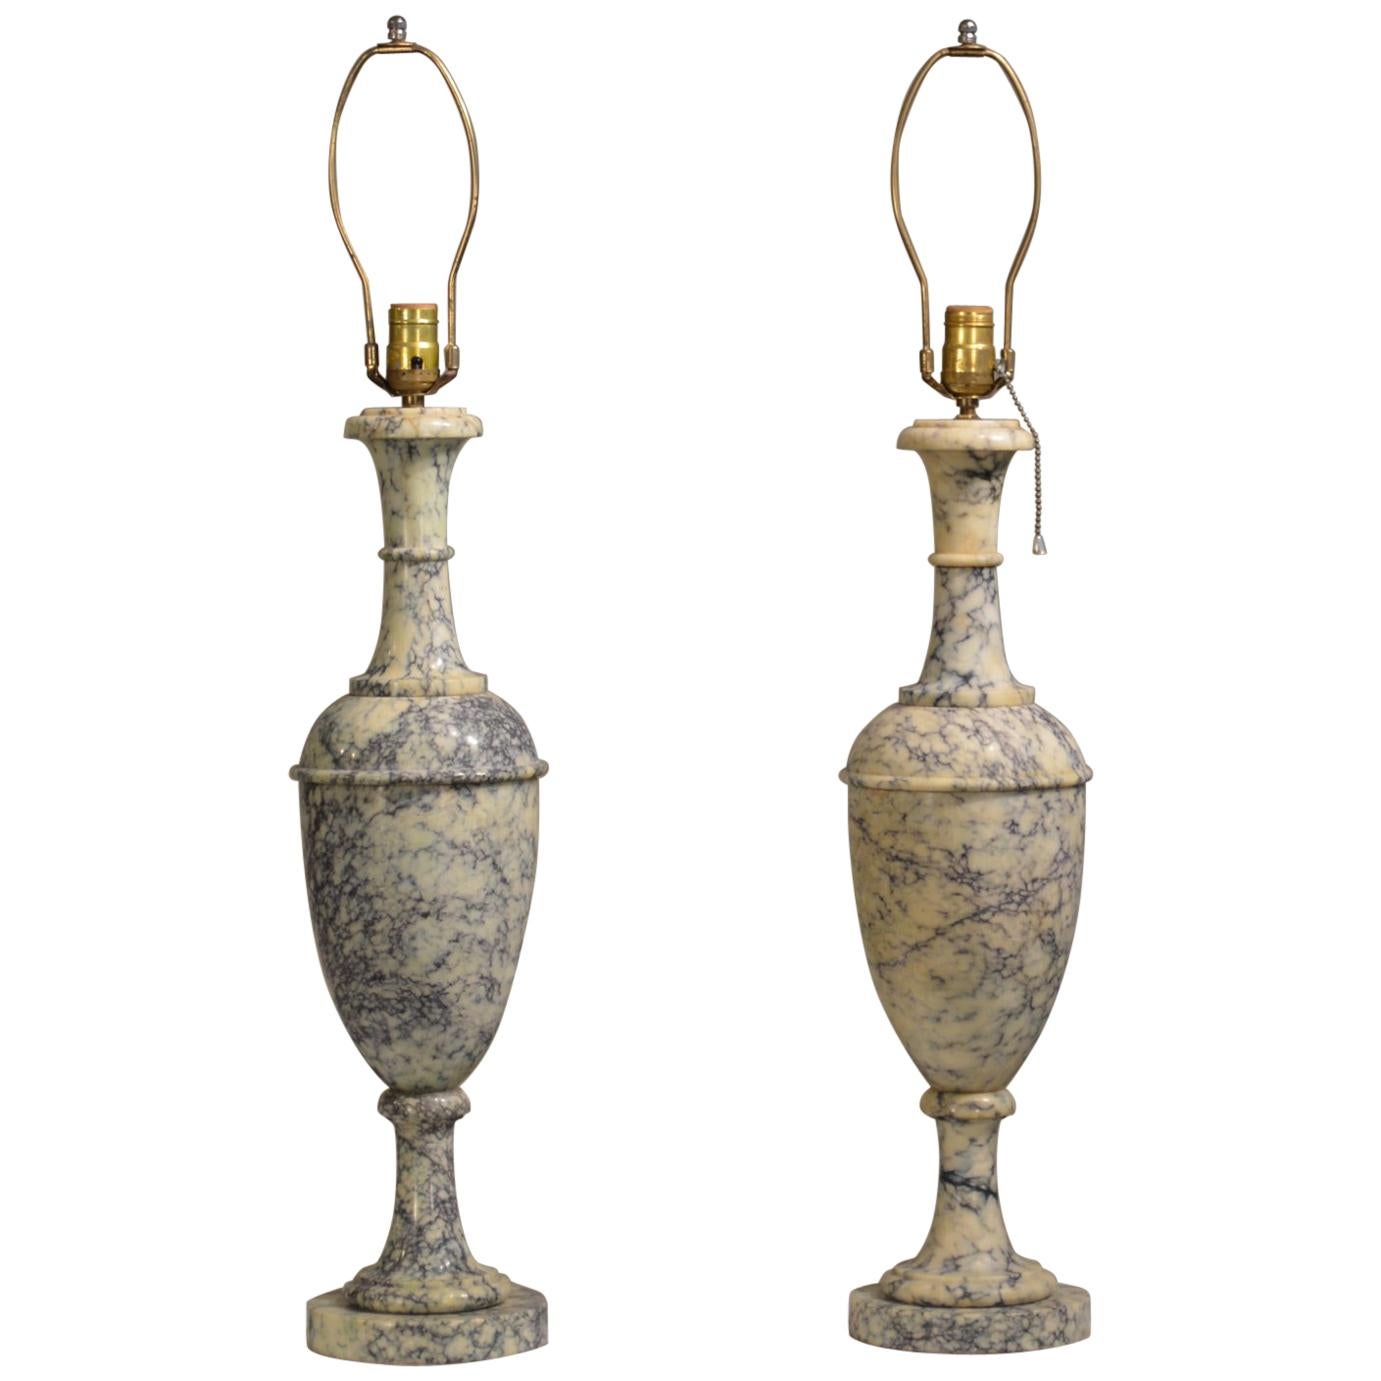 Neoclassical Italian Blue Veined Marble Urn Table Lamps